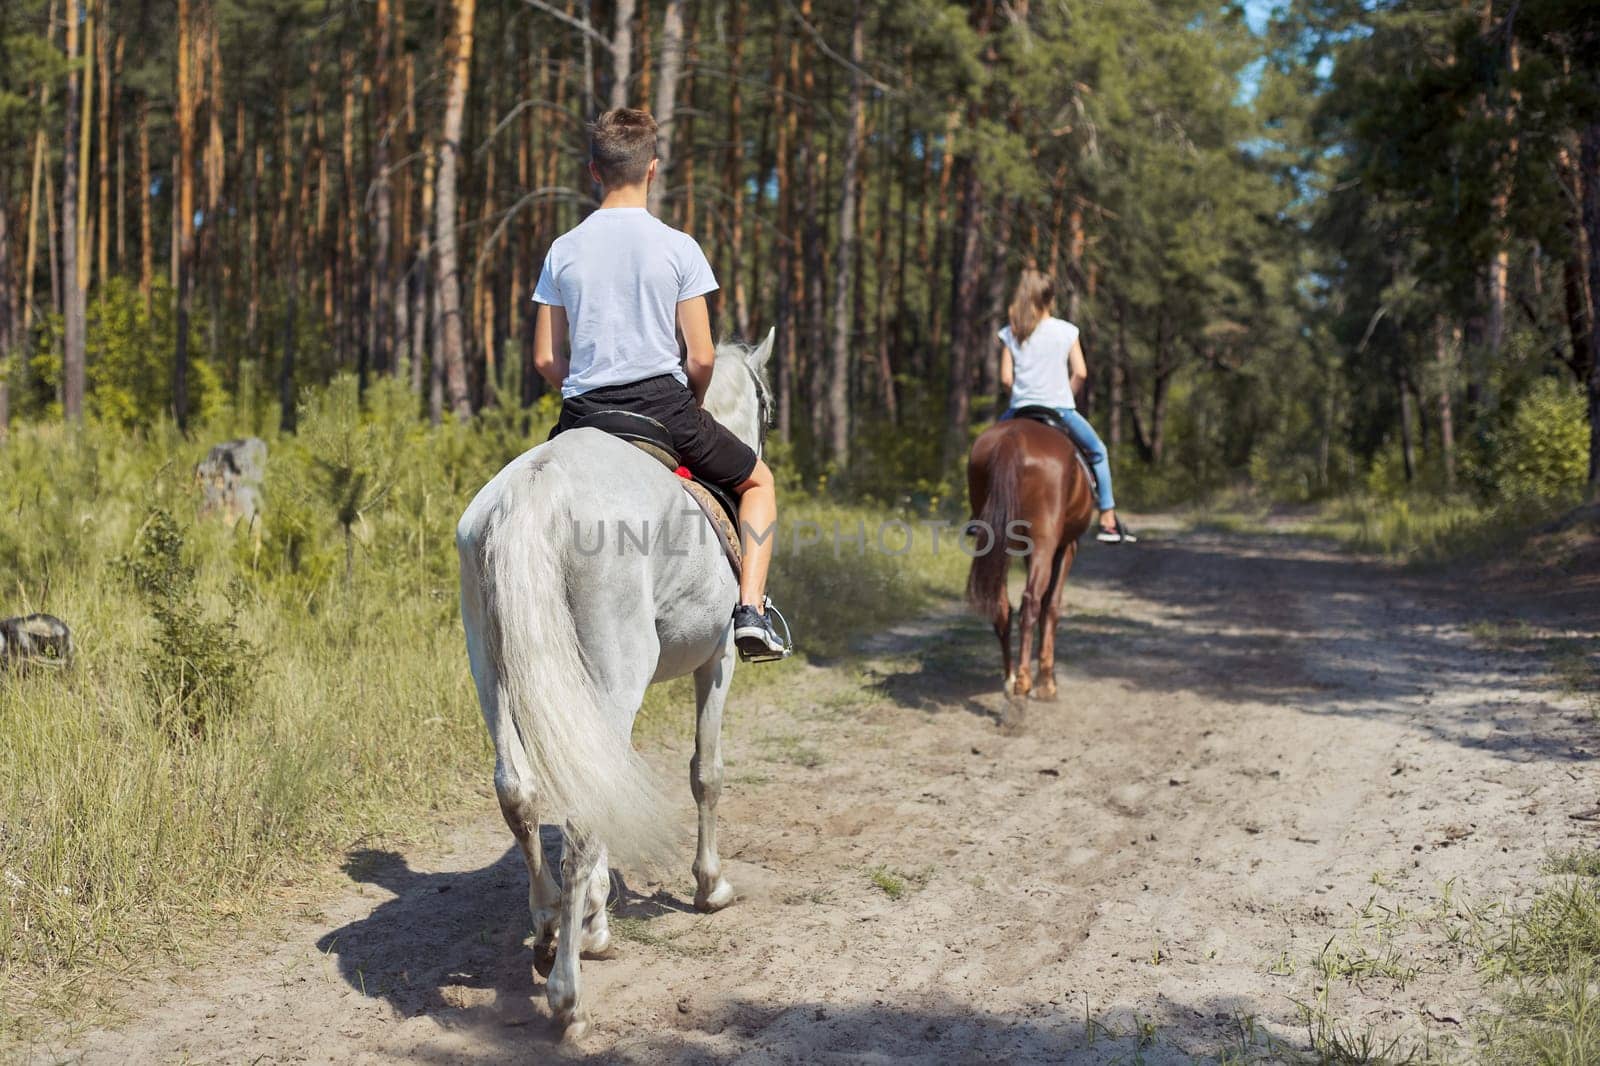 Group of teenagers on horseback riding in summer park, back view